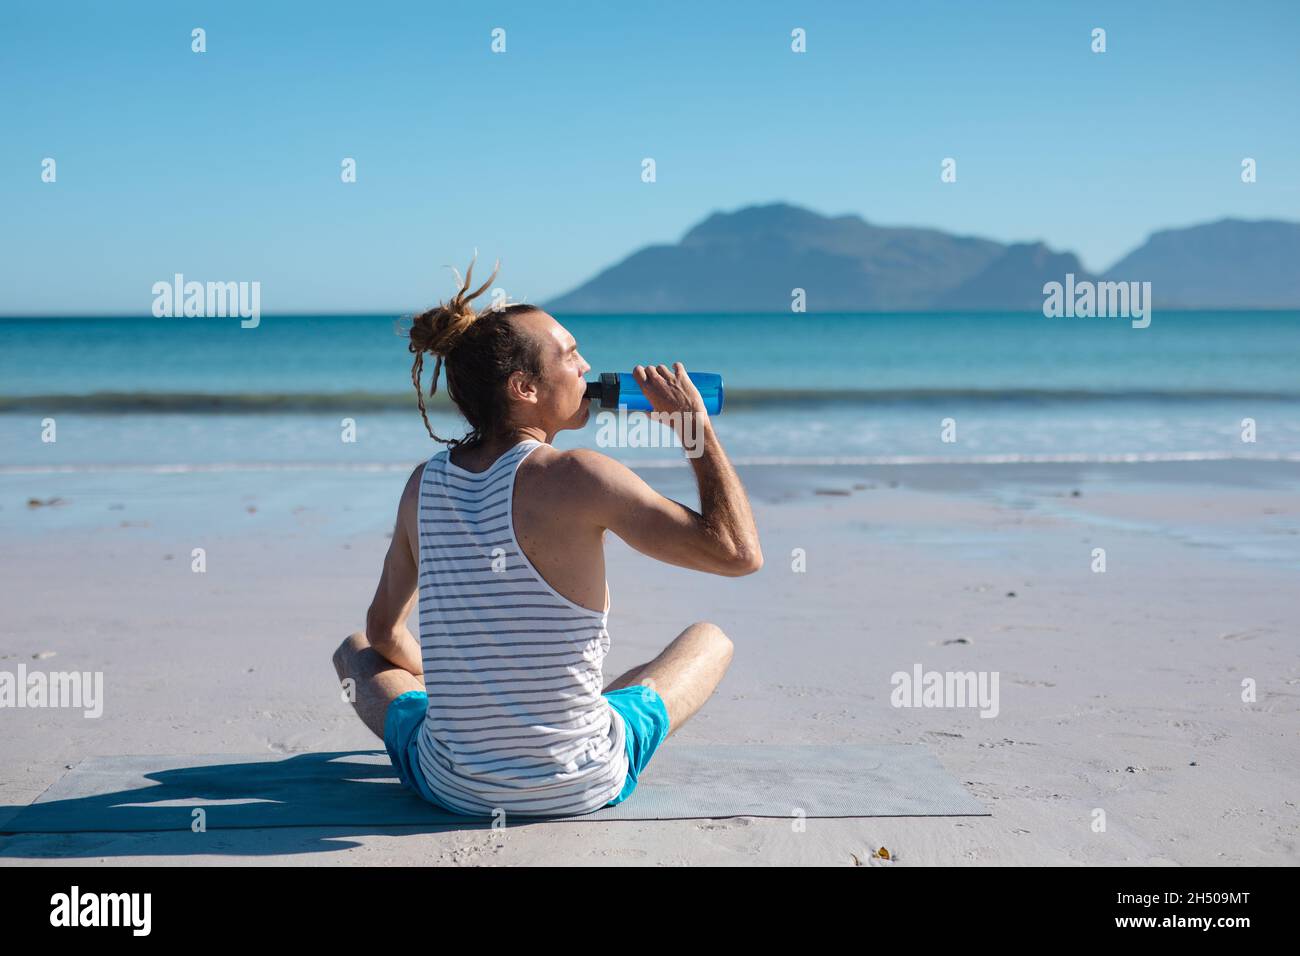 Rear view of man drinking water from bottle while doing yoga at beach on sunny day Stock Photo